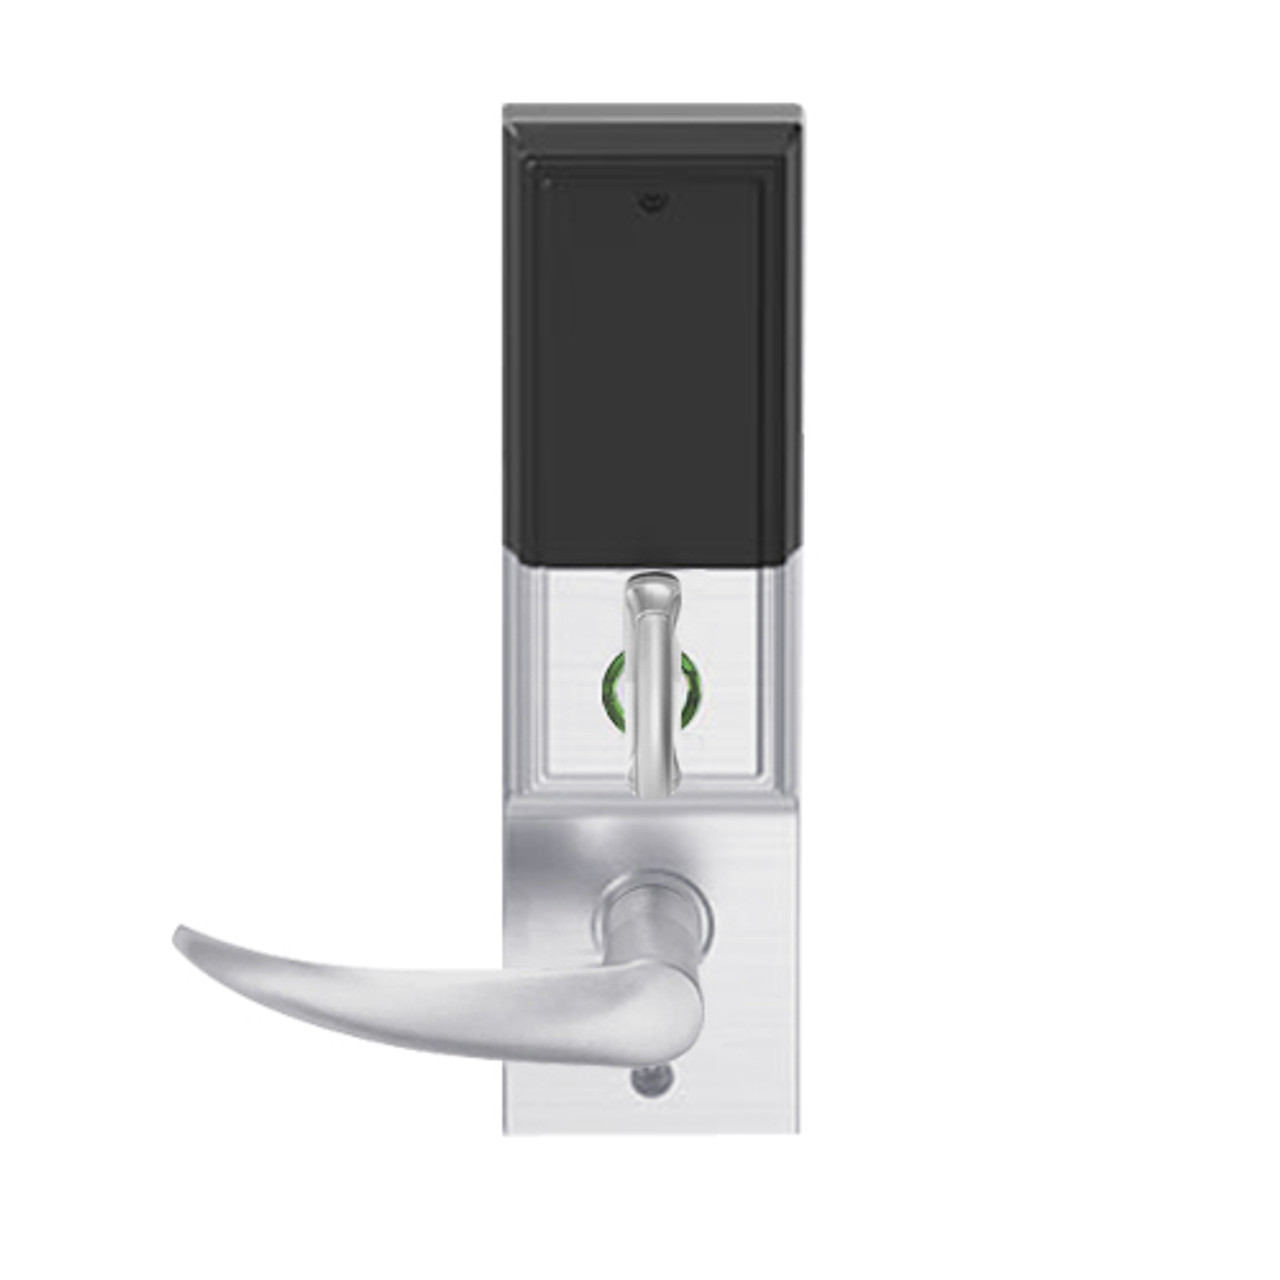 LEMD-ADD-J-OME-626AM Schlage Privacy/Apartment Wireless Addison Mortise Deadbolt Lock with LED and Omega Lever Prepped for FSIC in Satin Chrome Antimicrobial